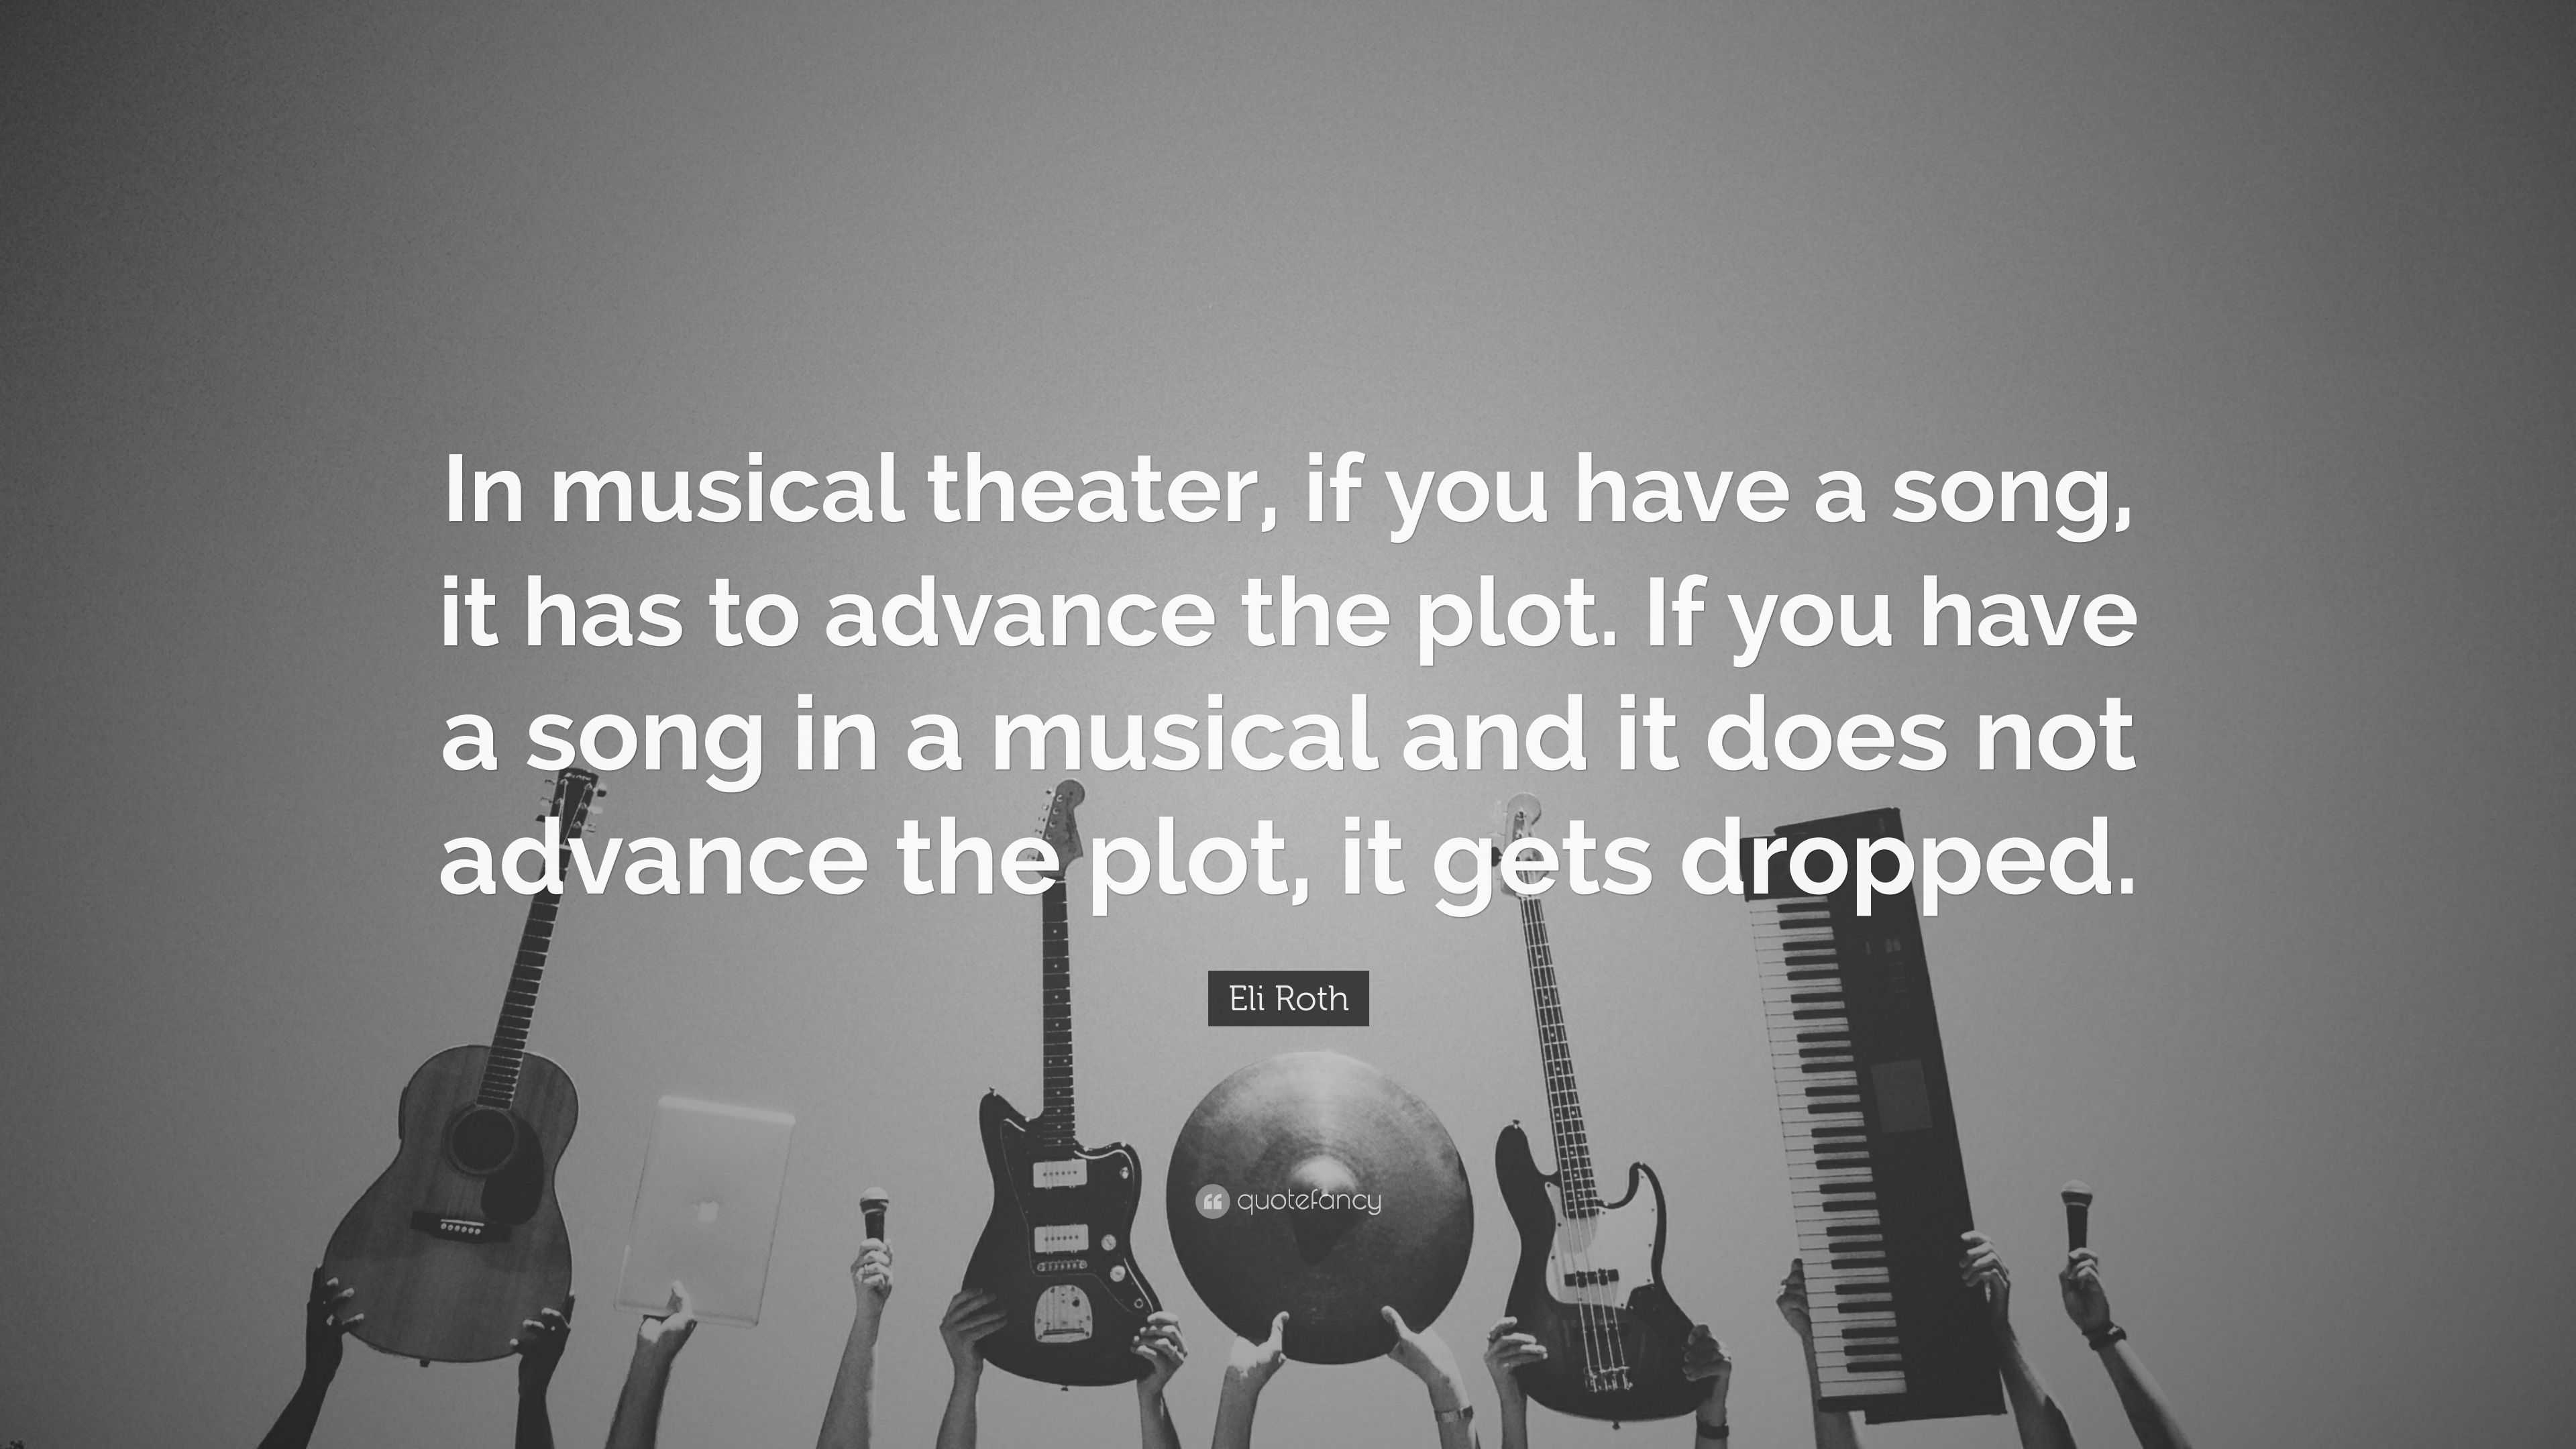 Eli Roth Quote: “In musical theater, if you have a song, it has to ...